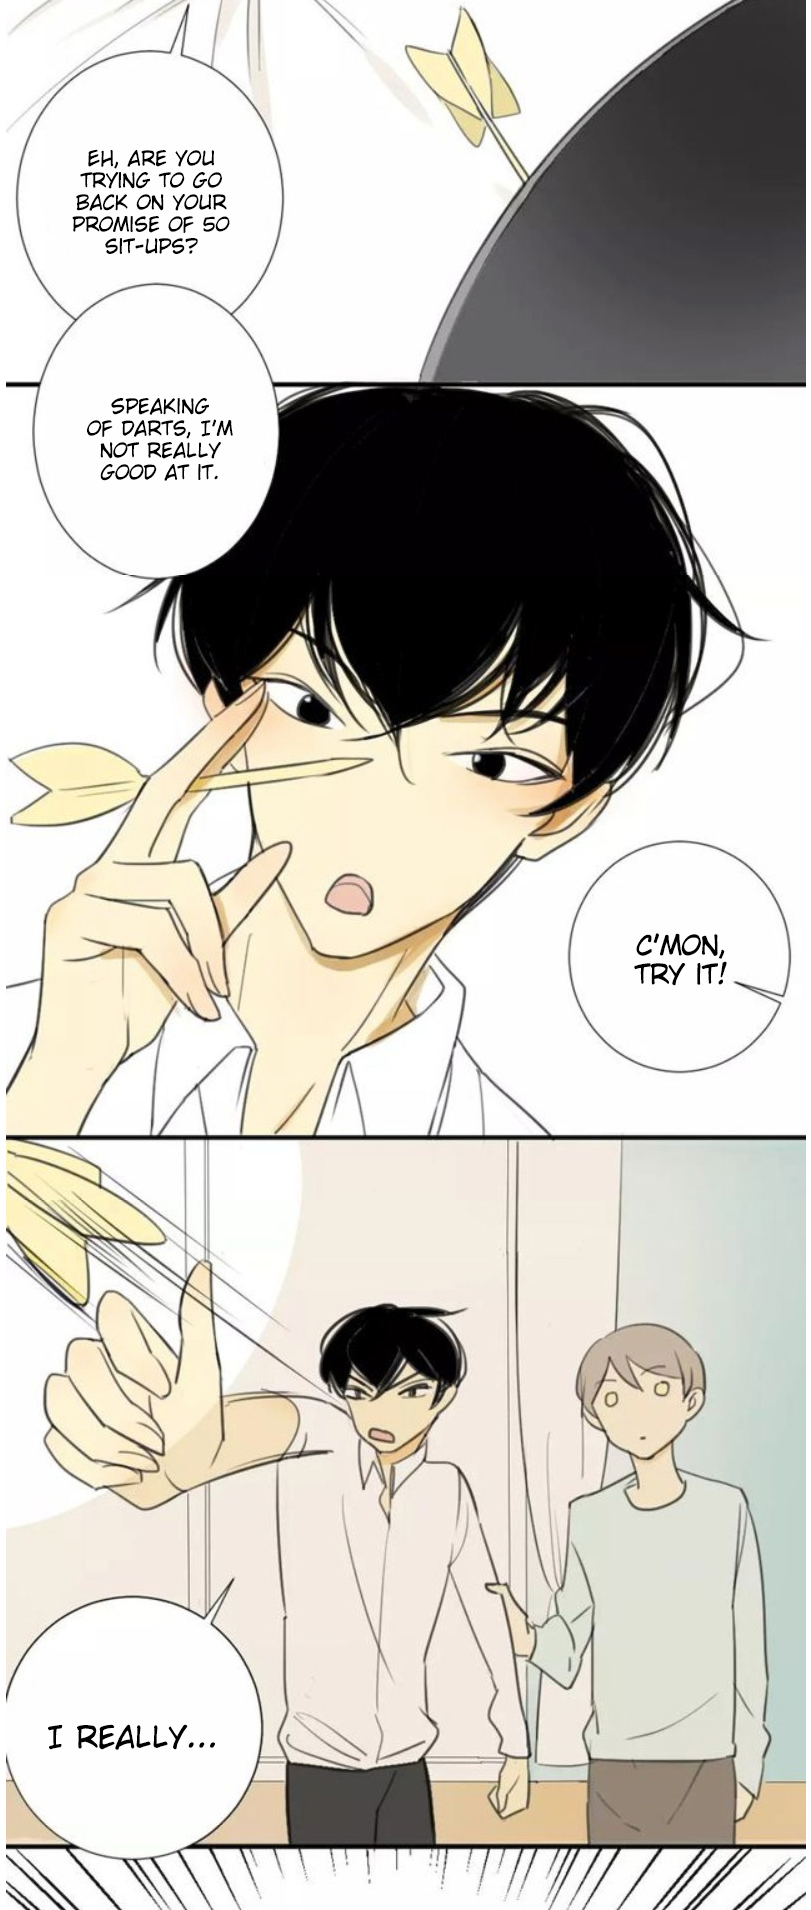 Classmate Relationship? Ch. 25.5 Satisfied with just this